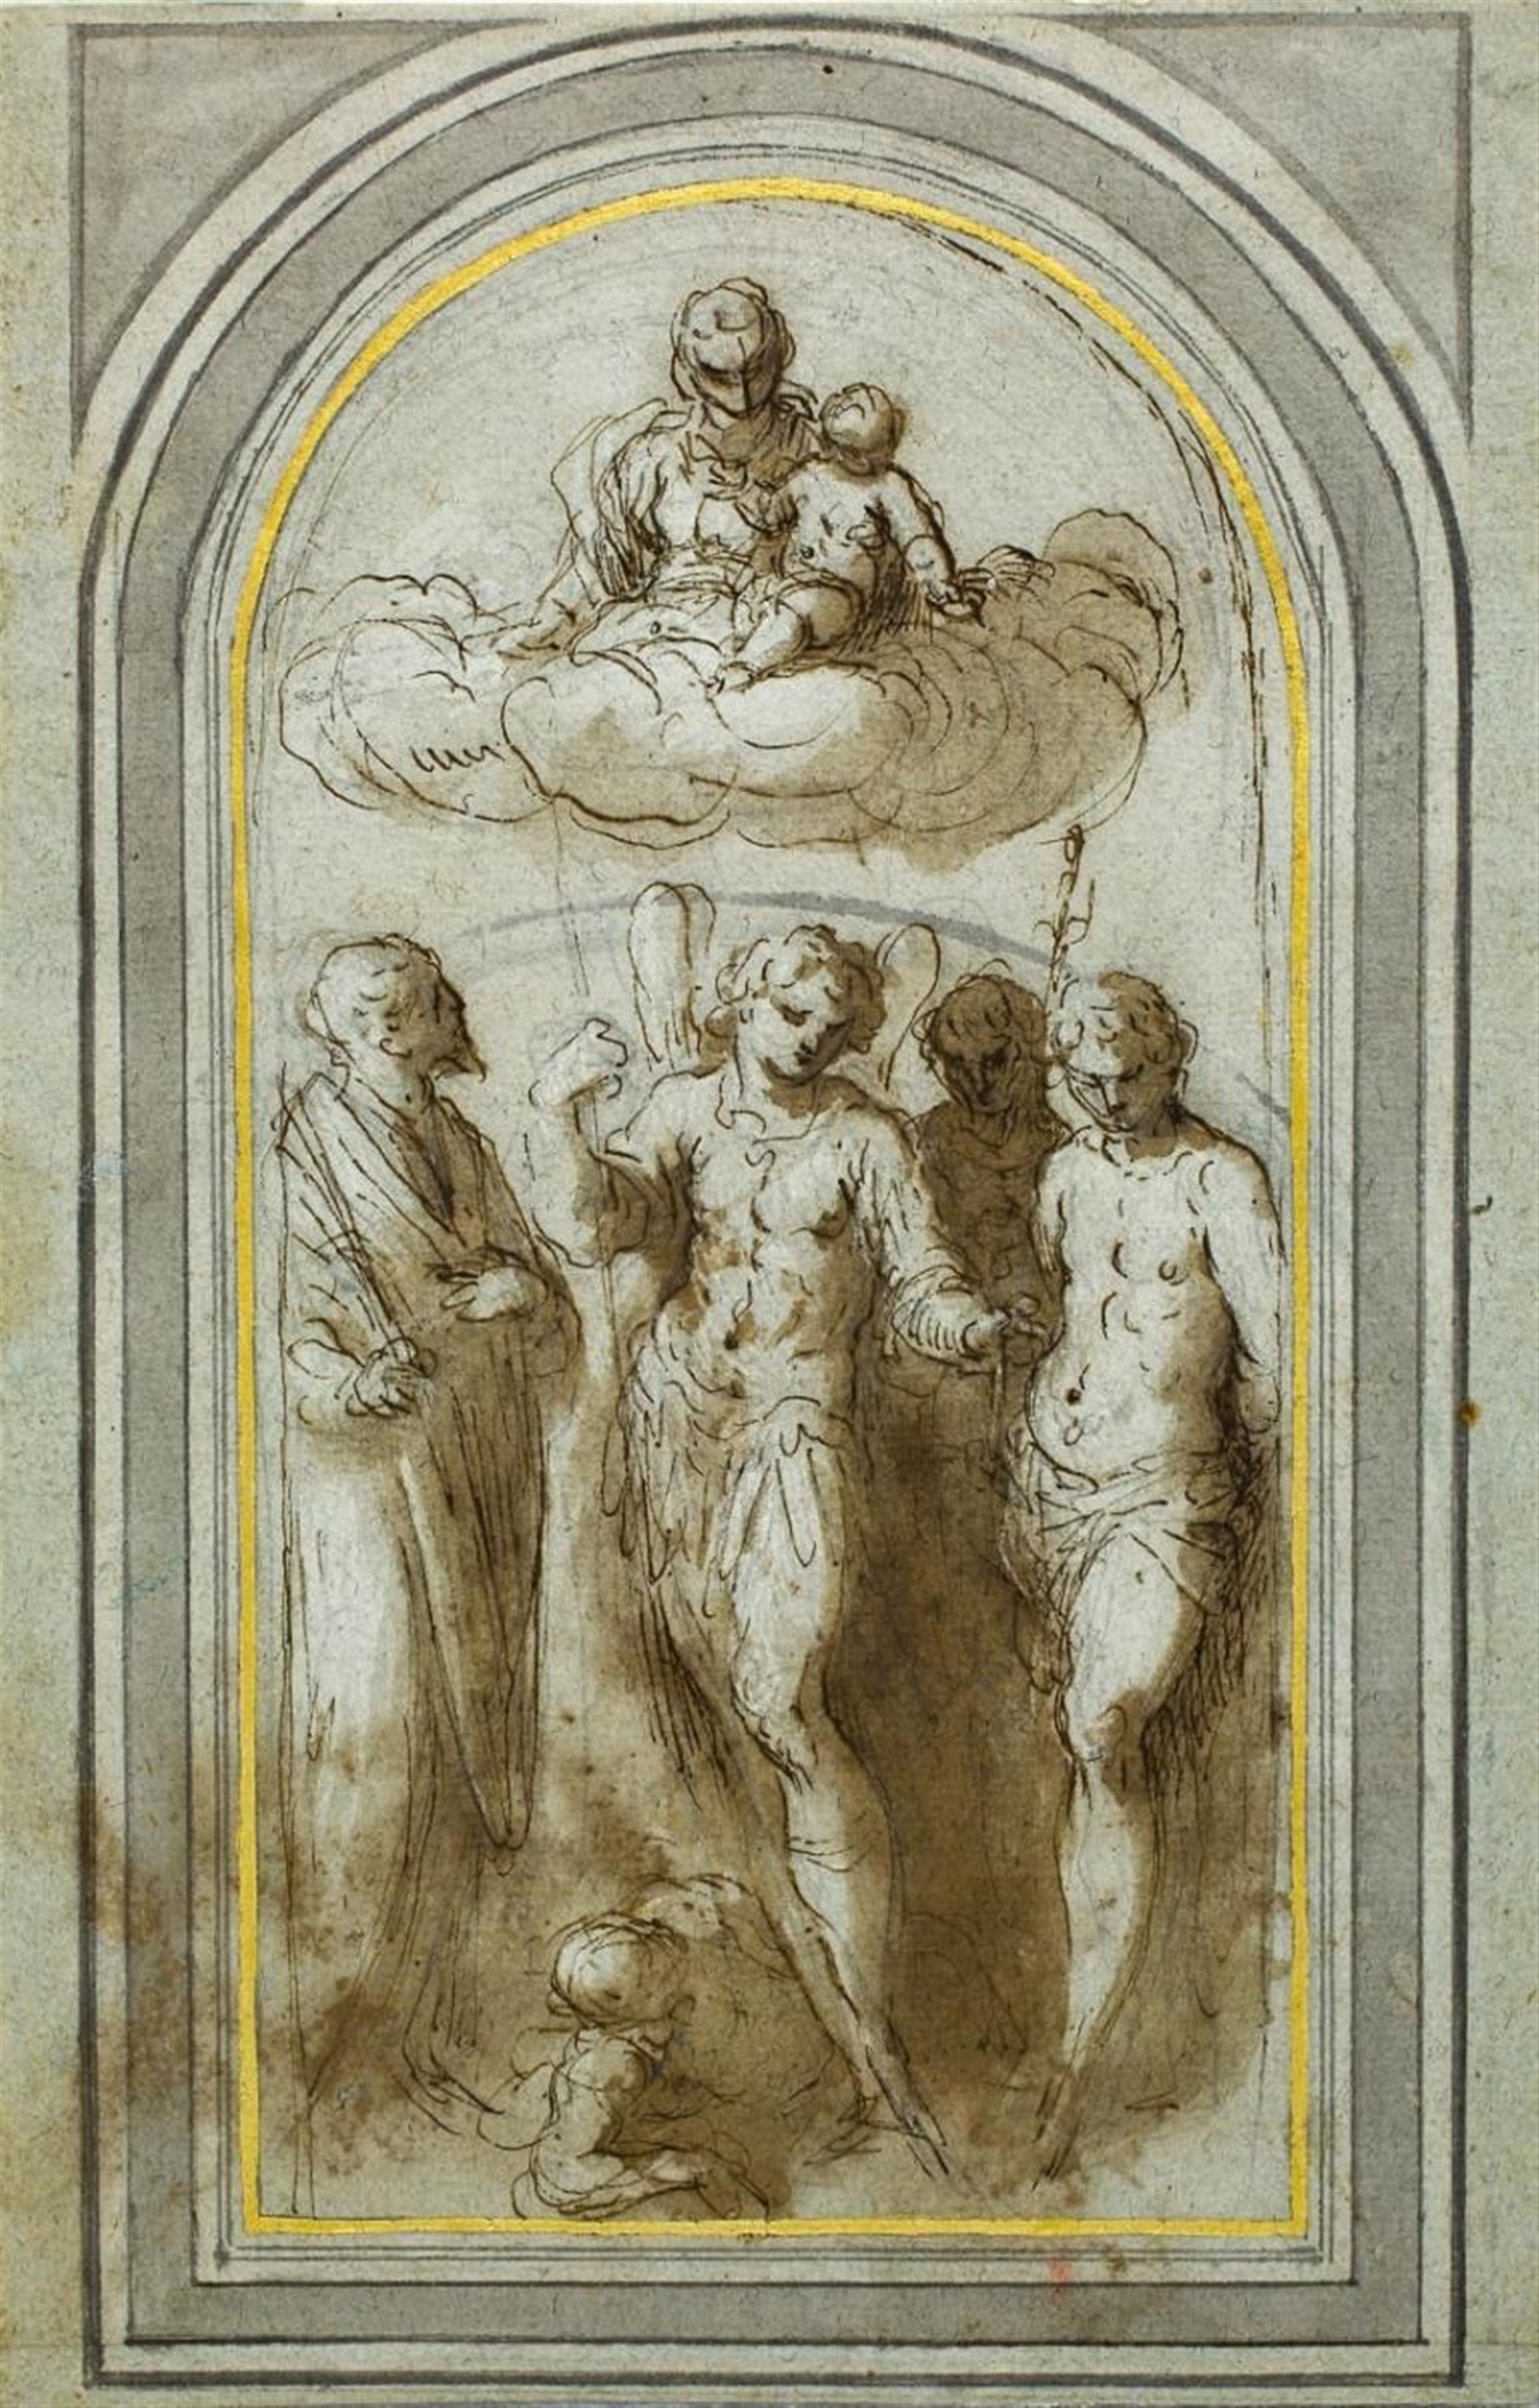 Jacopo Negretti, called Palma Il Giovane - THE VIRGIN APPEARING TO THE SAINTS MICHAEL, SEBASTIAN AND TWO FURTHER SAINTS - image-1